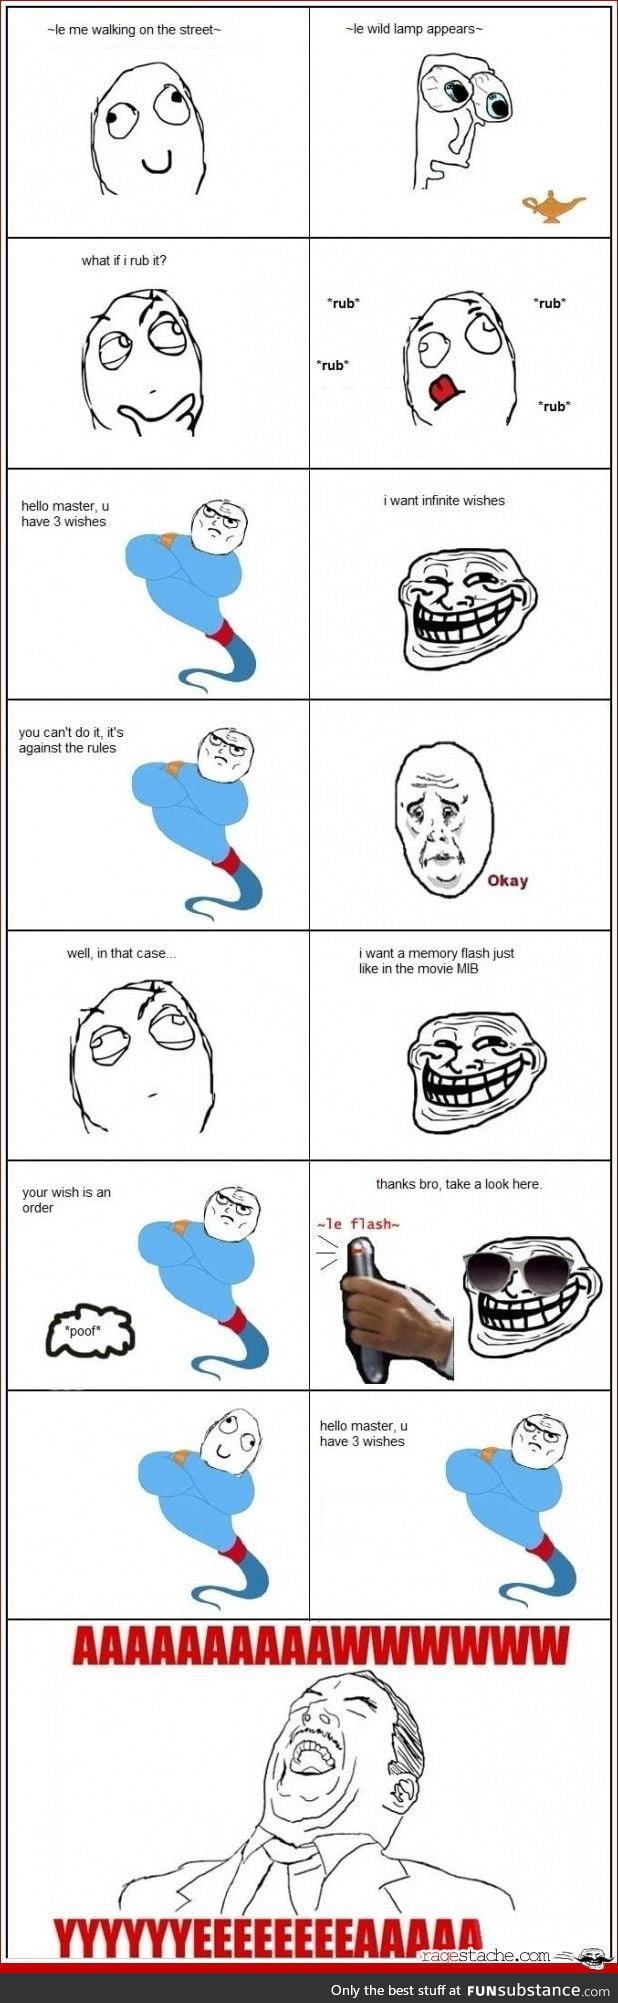 Posting rage comics until getting a dedicated section